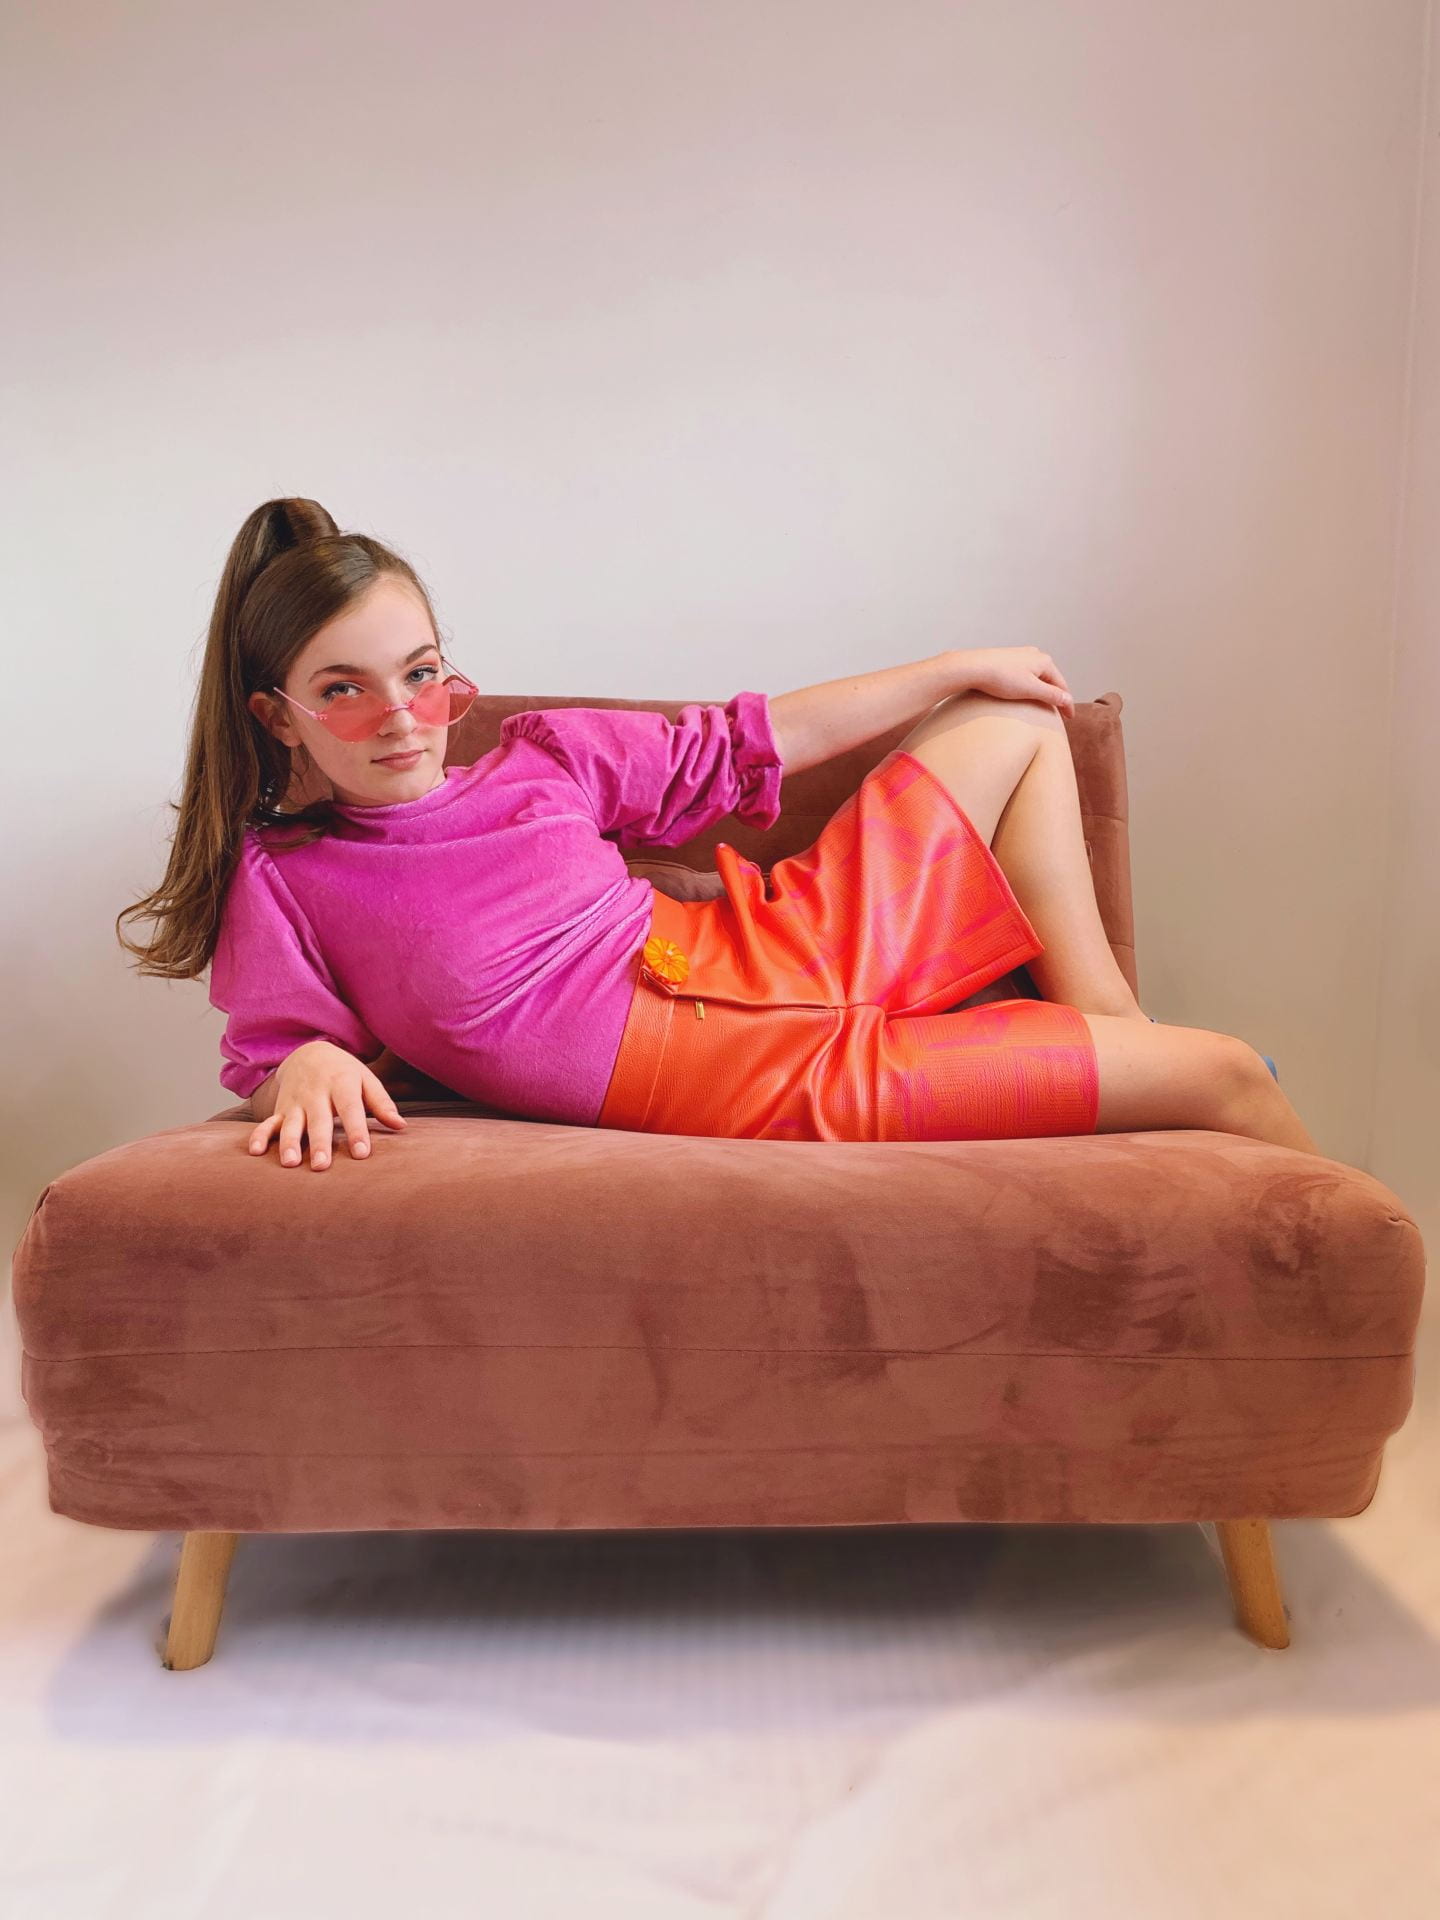 Photograph of a girl sat on a chair modelling an item in the 'Let's Get Trippy' collection.